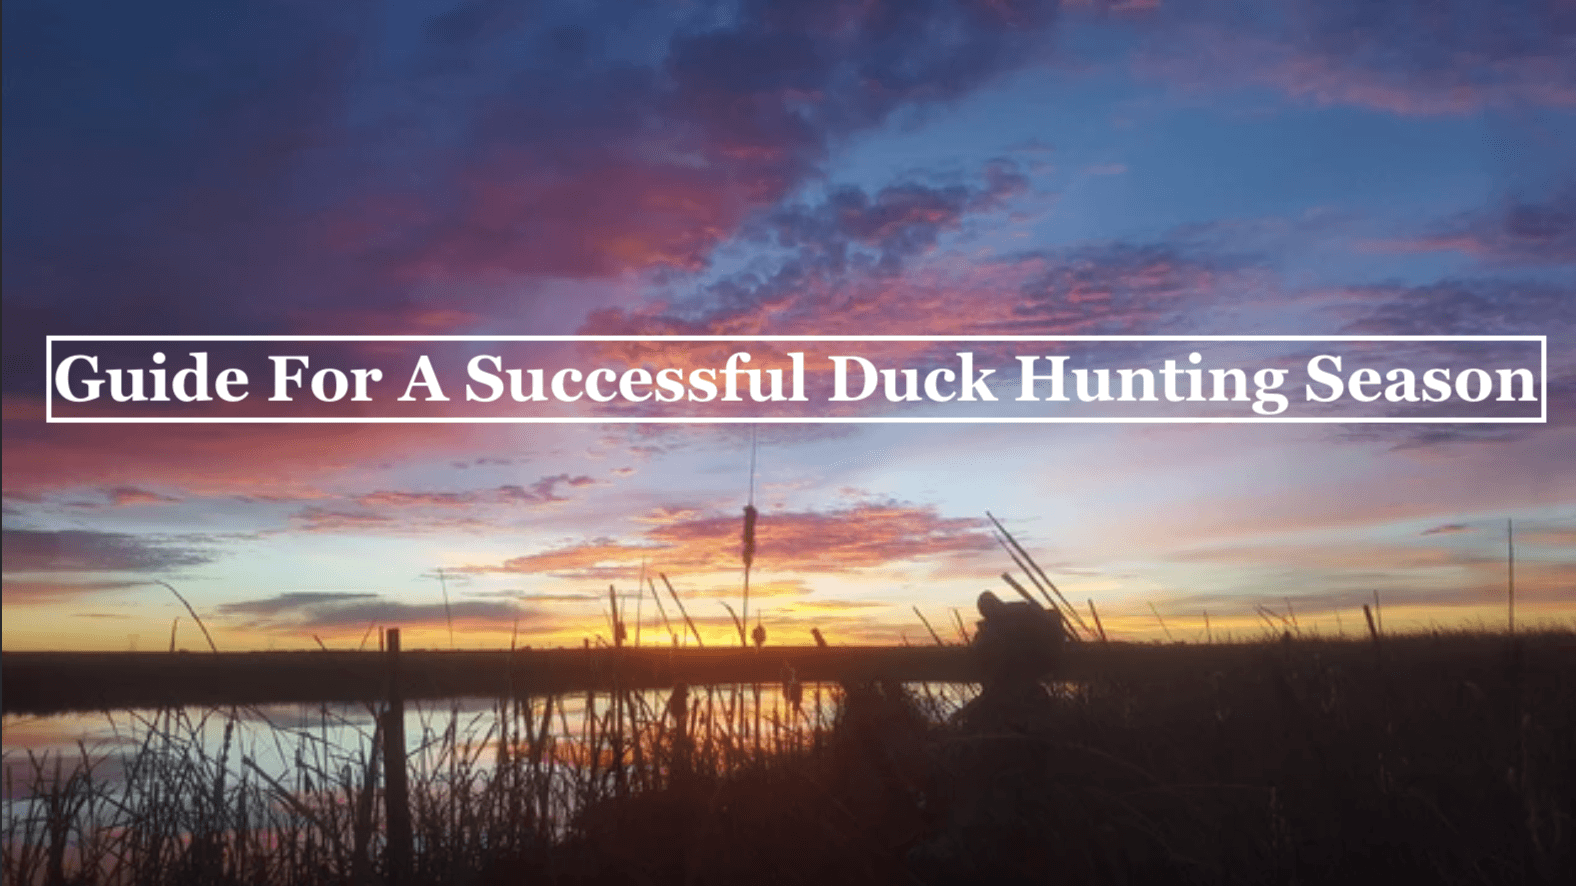 Guide For A Successful Duck Hunting Season